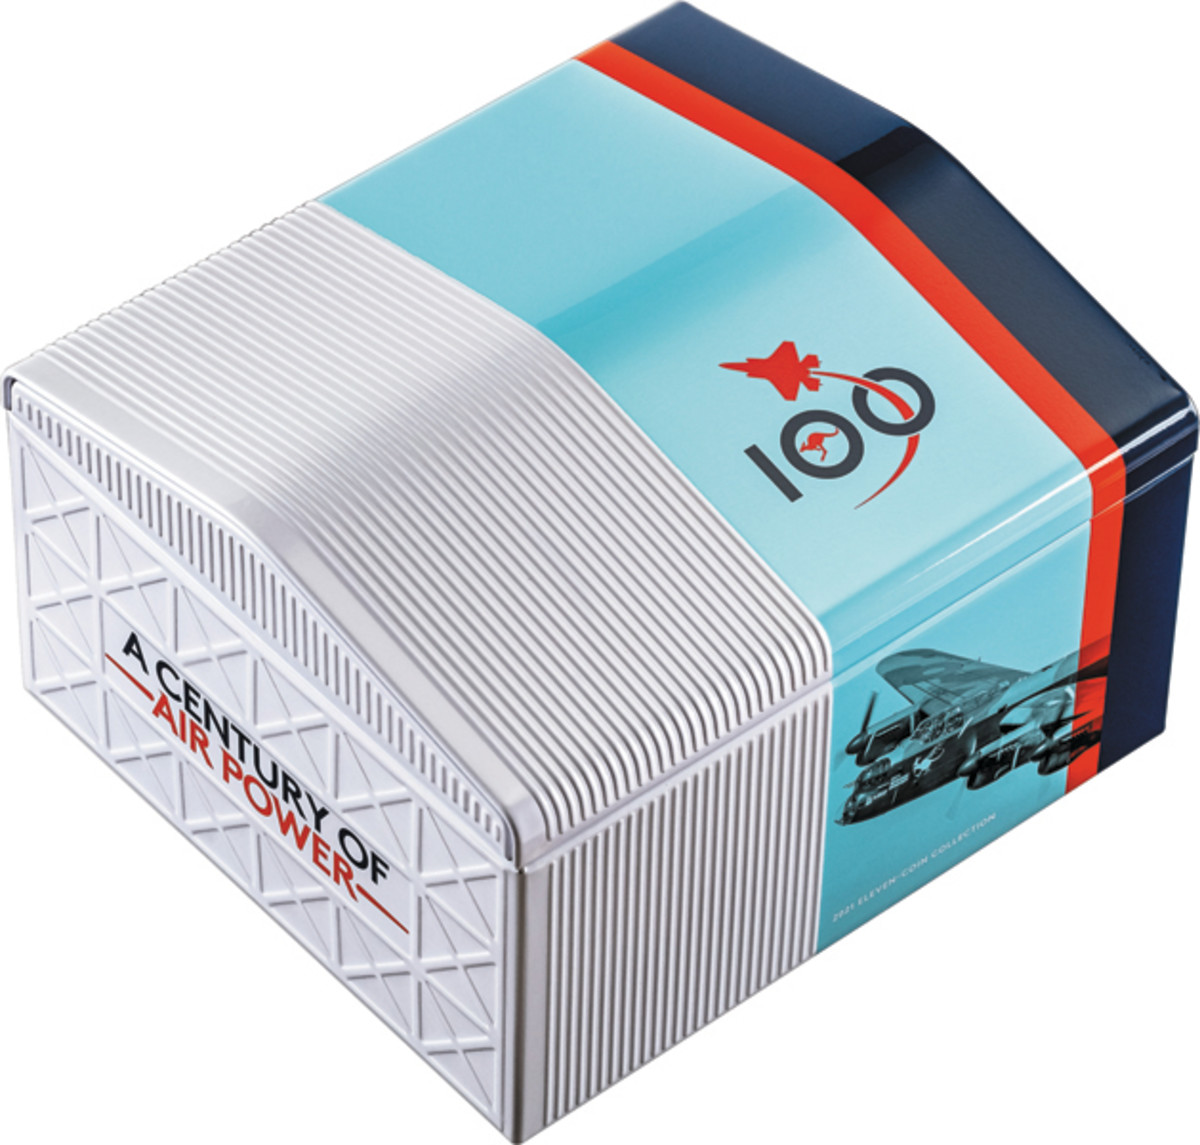 The Centenary of the RAAF coin cards come in this handy tin aircraft hangar. Packaging makes all the difference.